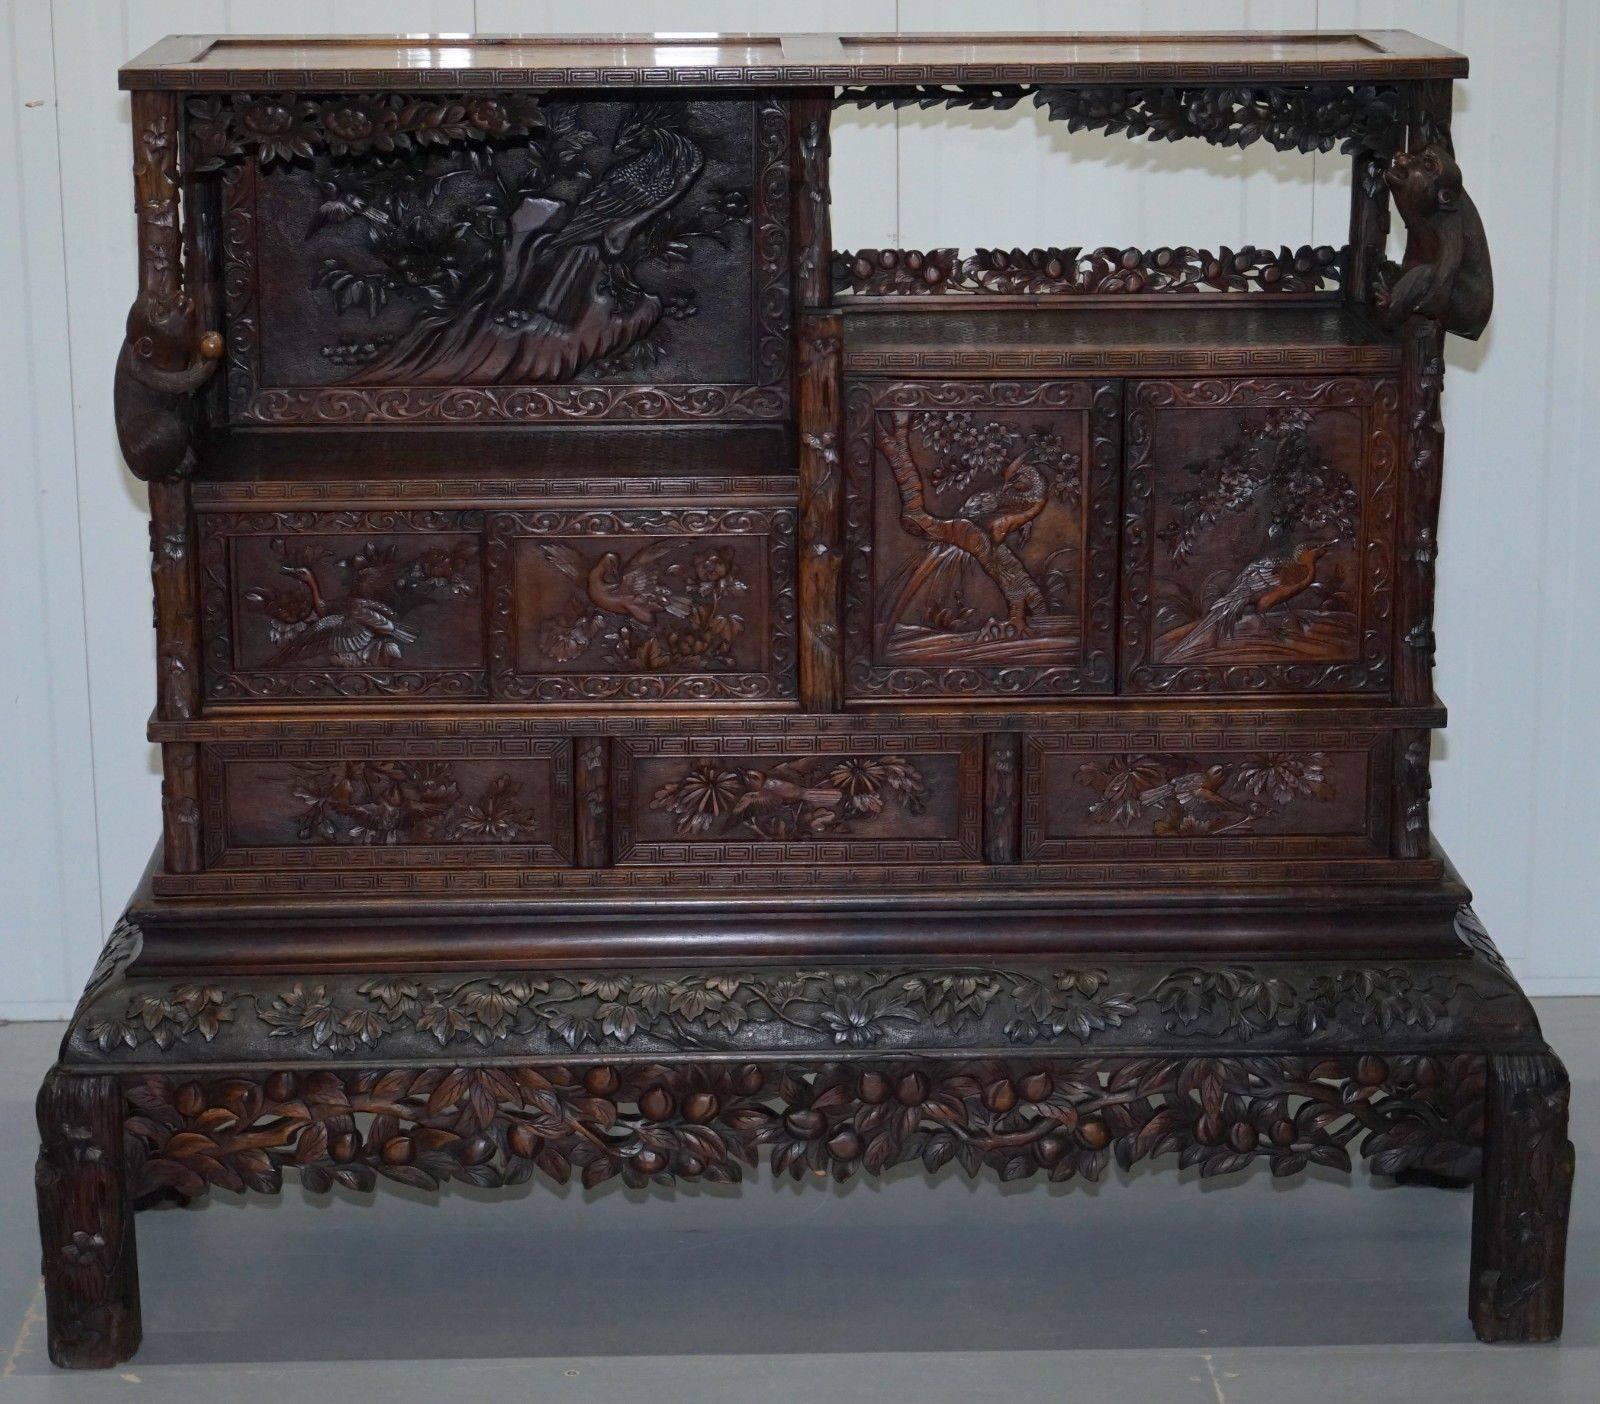 We are delighted to offer for sale this absolutely stunning hand-carved Chinese cabinet with drawers depicting bird’s, flowers and large monkeys 

A truly stunning find, the plinth base separates into two sections, the first is almost completely